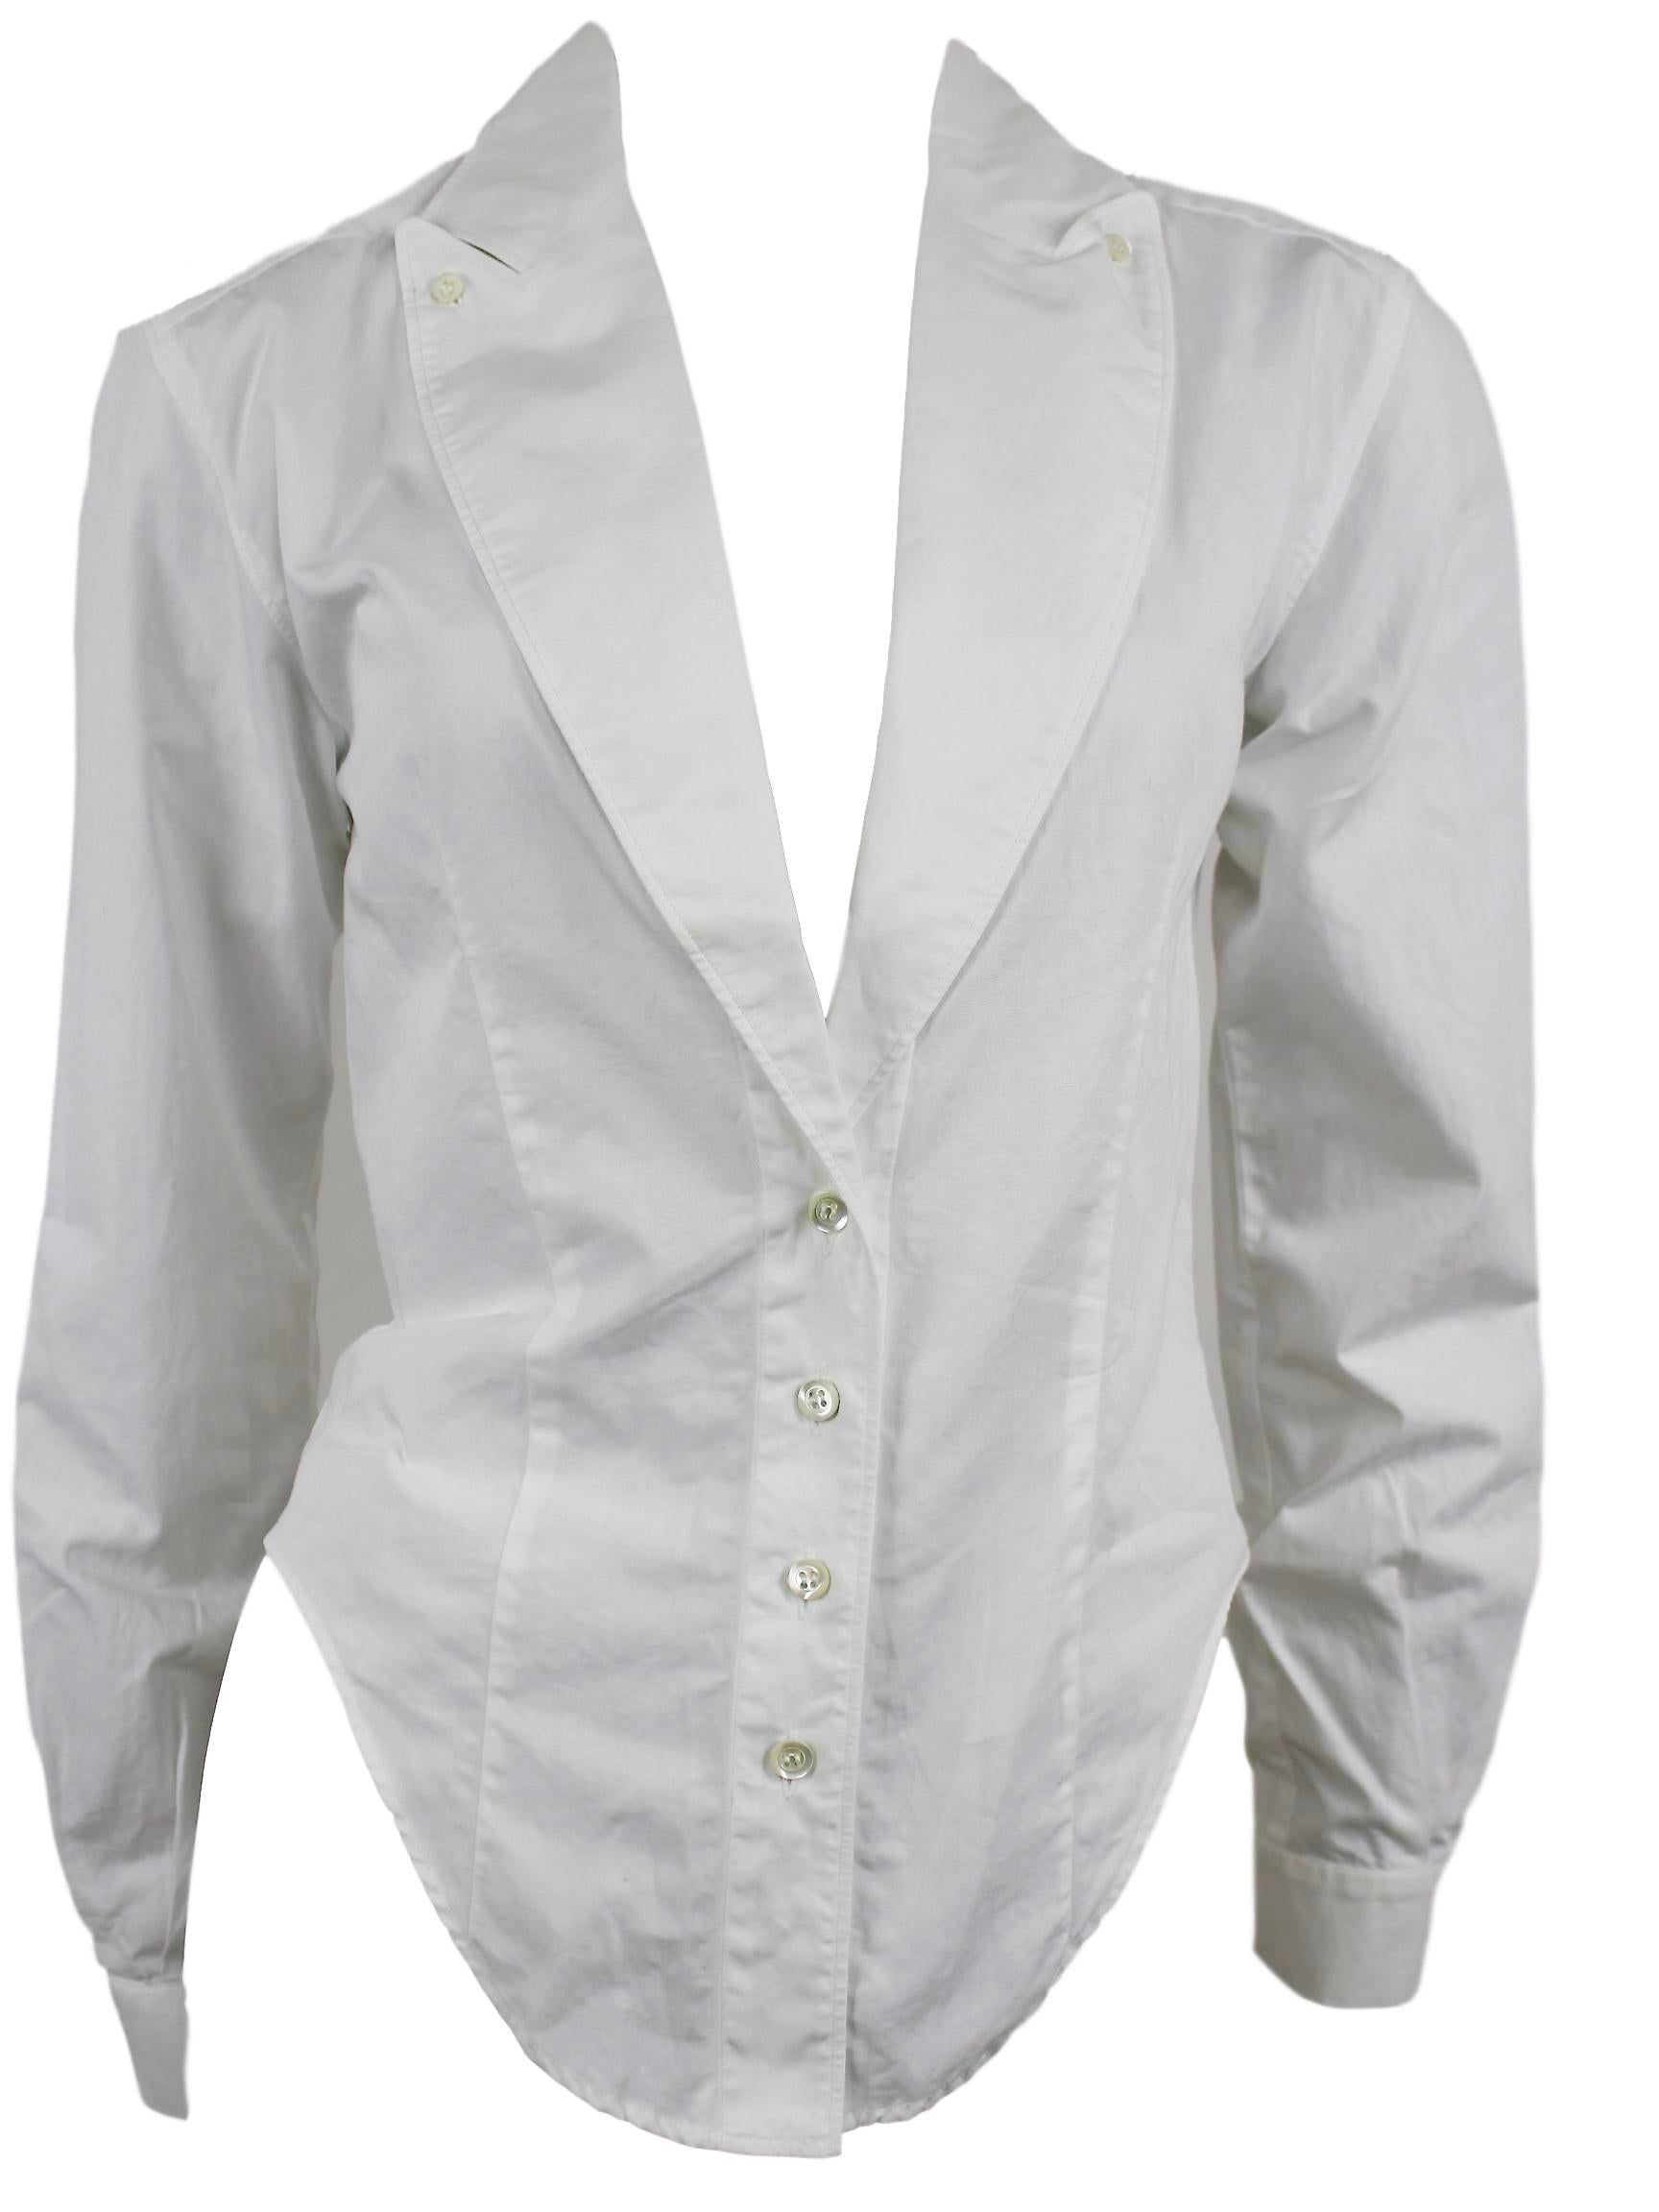 Alexander McQueen Early Collection Fitted Blouse/Jacket For Sale 2